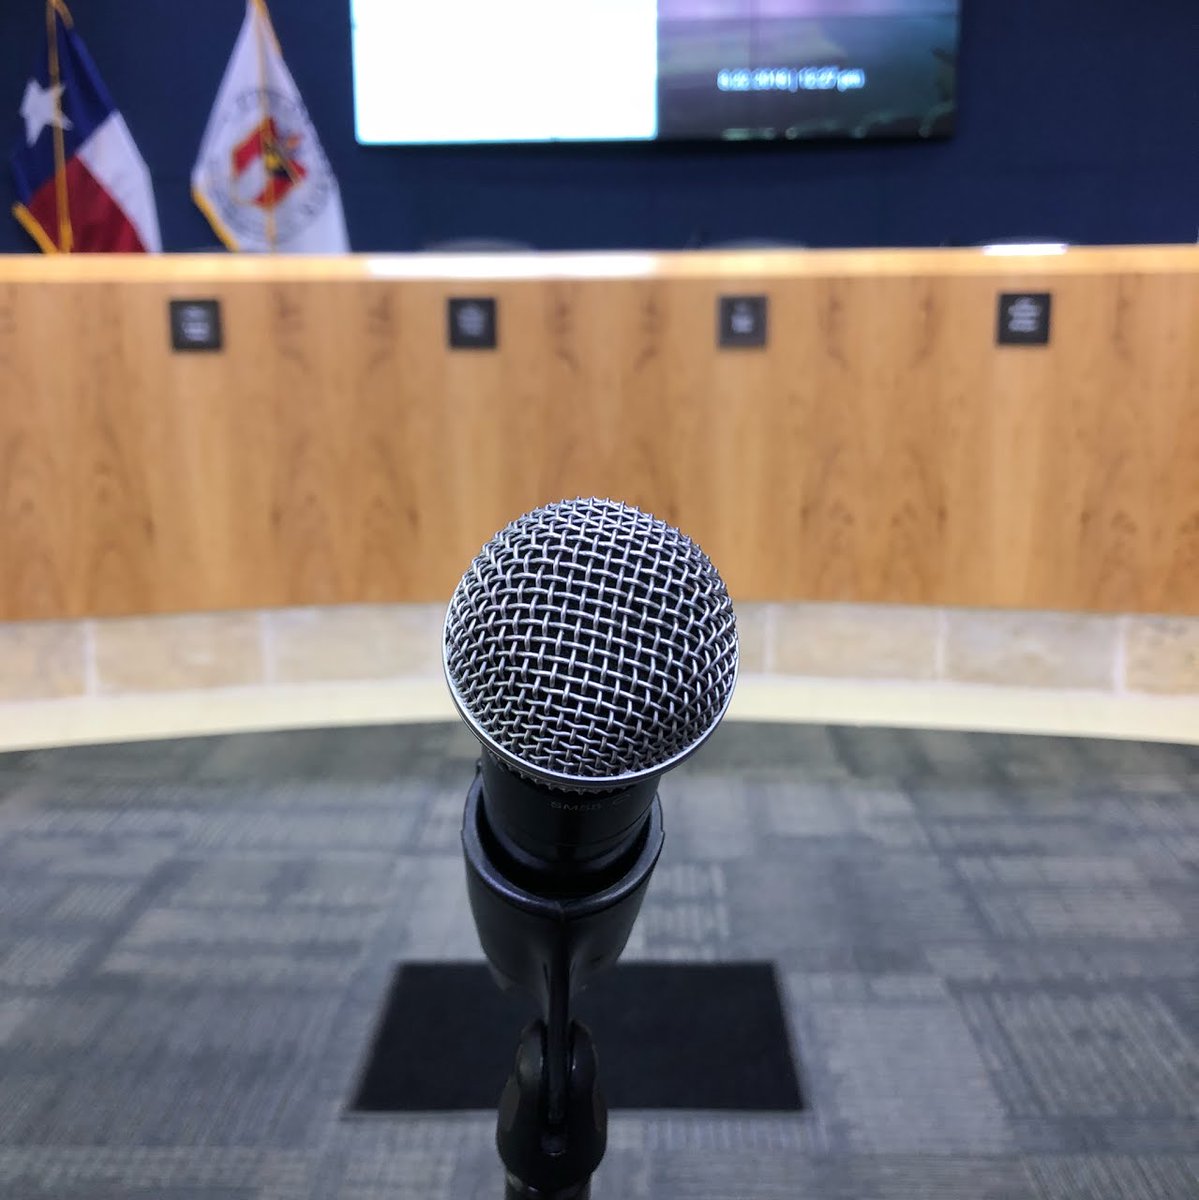 The May 16 #ATXCouncil meeting focusing on the Spring 2024 Land Development Code Amendments will also include General Public Communication at noon. Registration to speak will open on May 7 at 9am and close on May 14 at 4:30pm. 📌 Learn more: bit.ly/44oBcaR